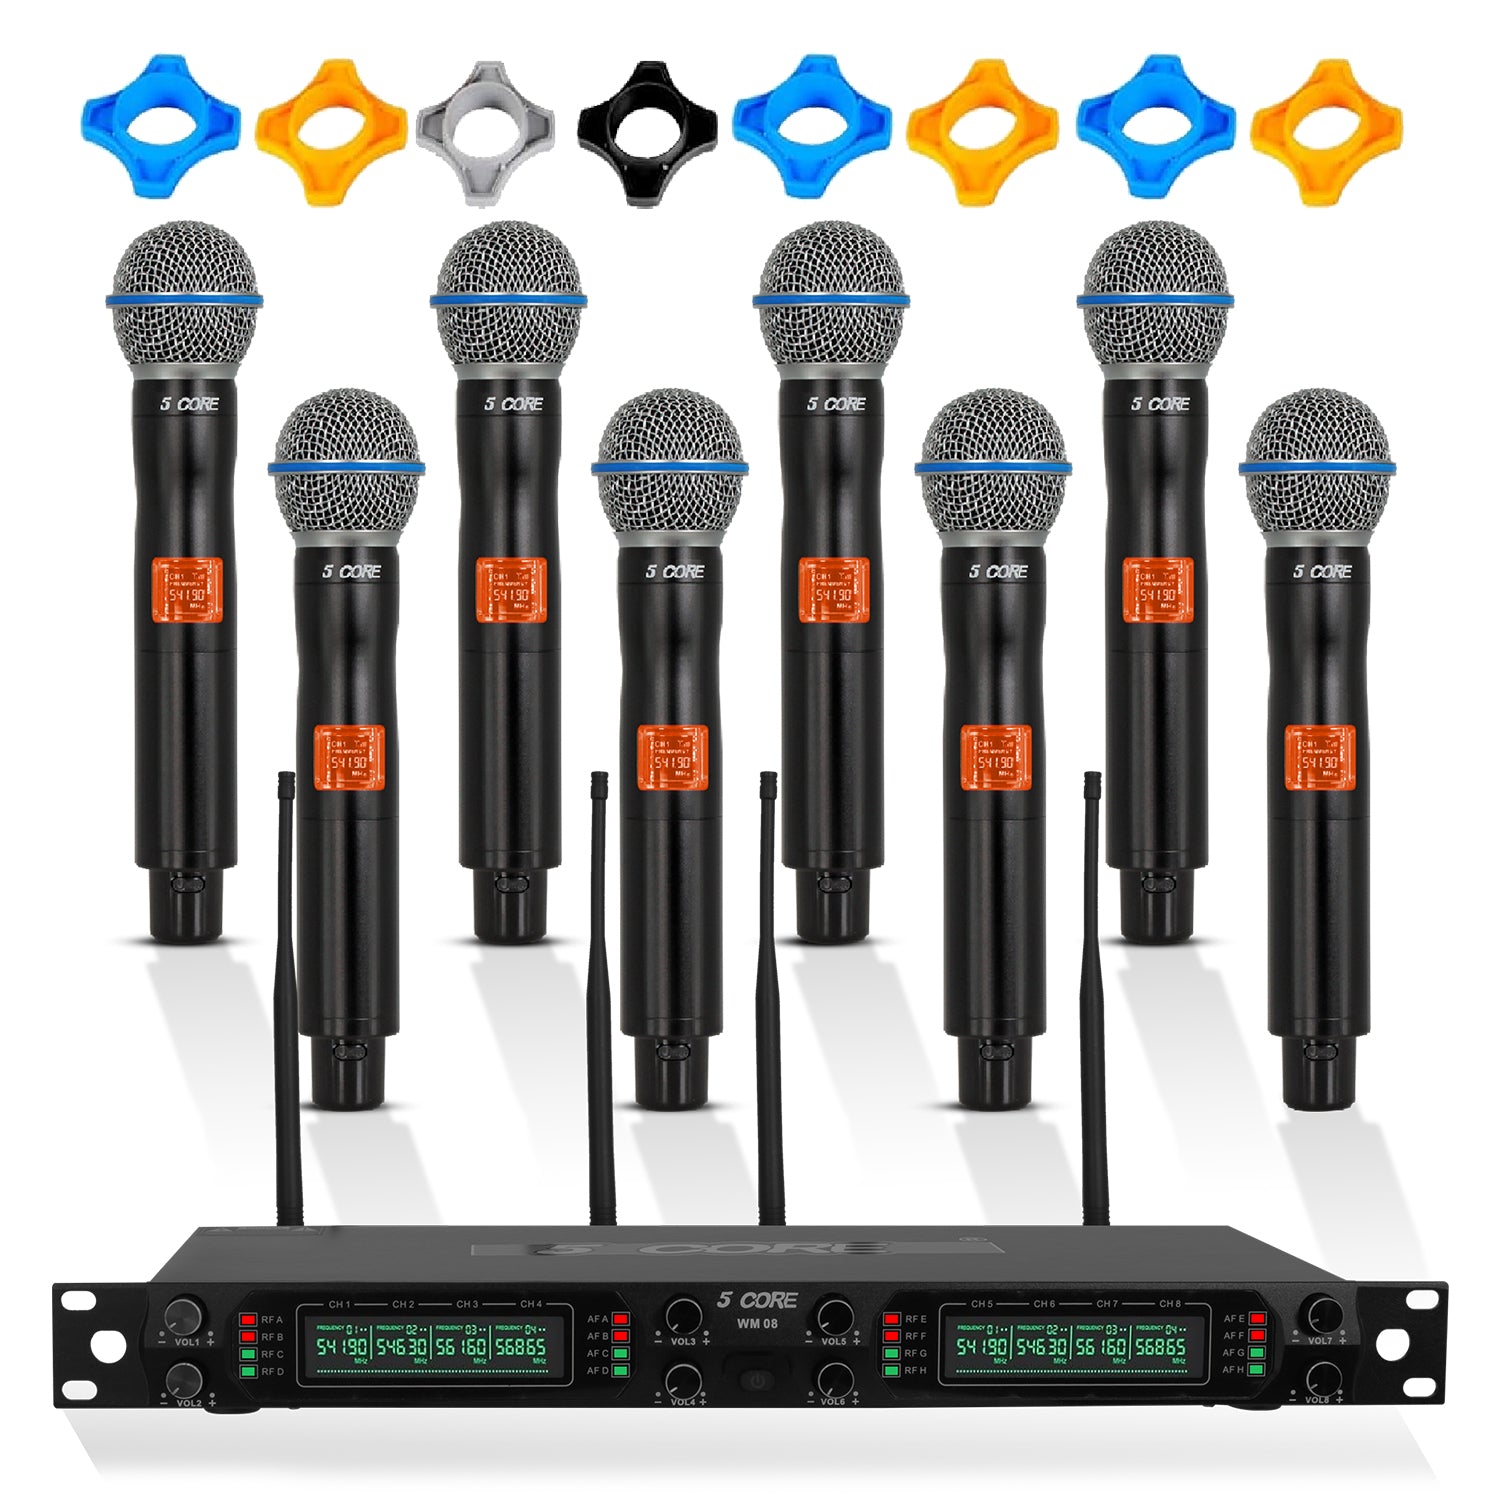 5 Core Wireless Microphone System 8 Channel UHF Portable Receiver w 8 Cordless Dynamic Mic 492F Range